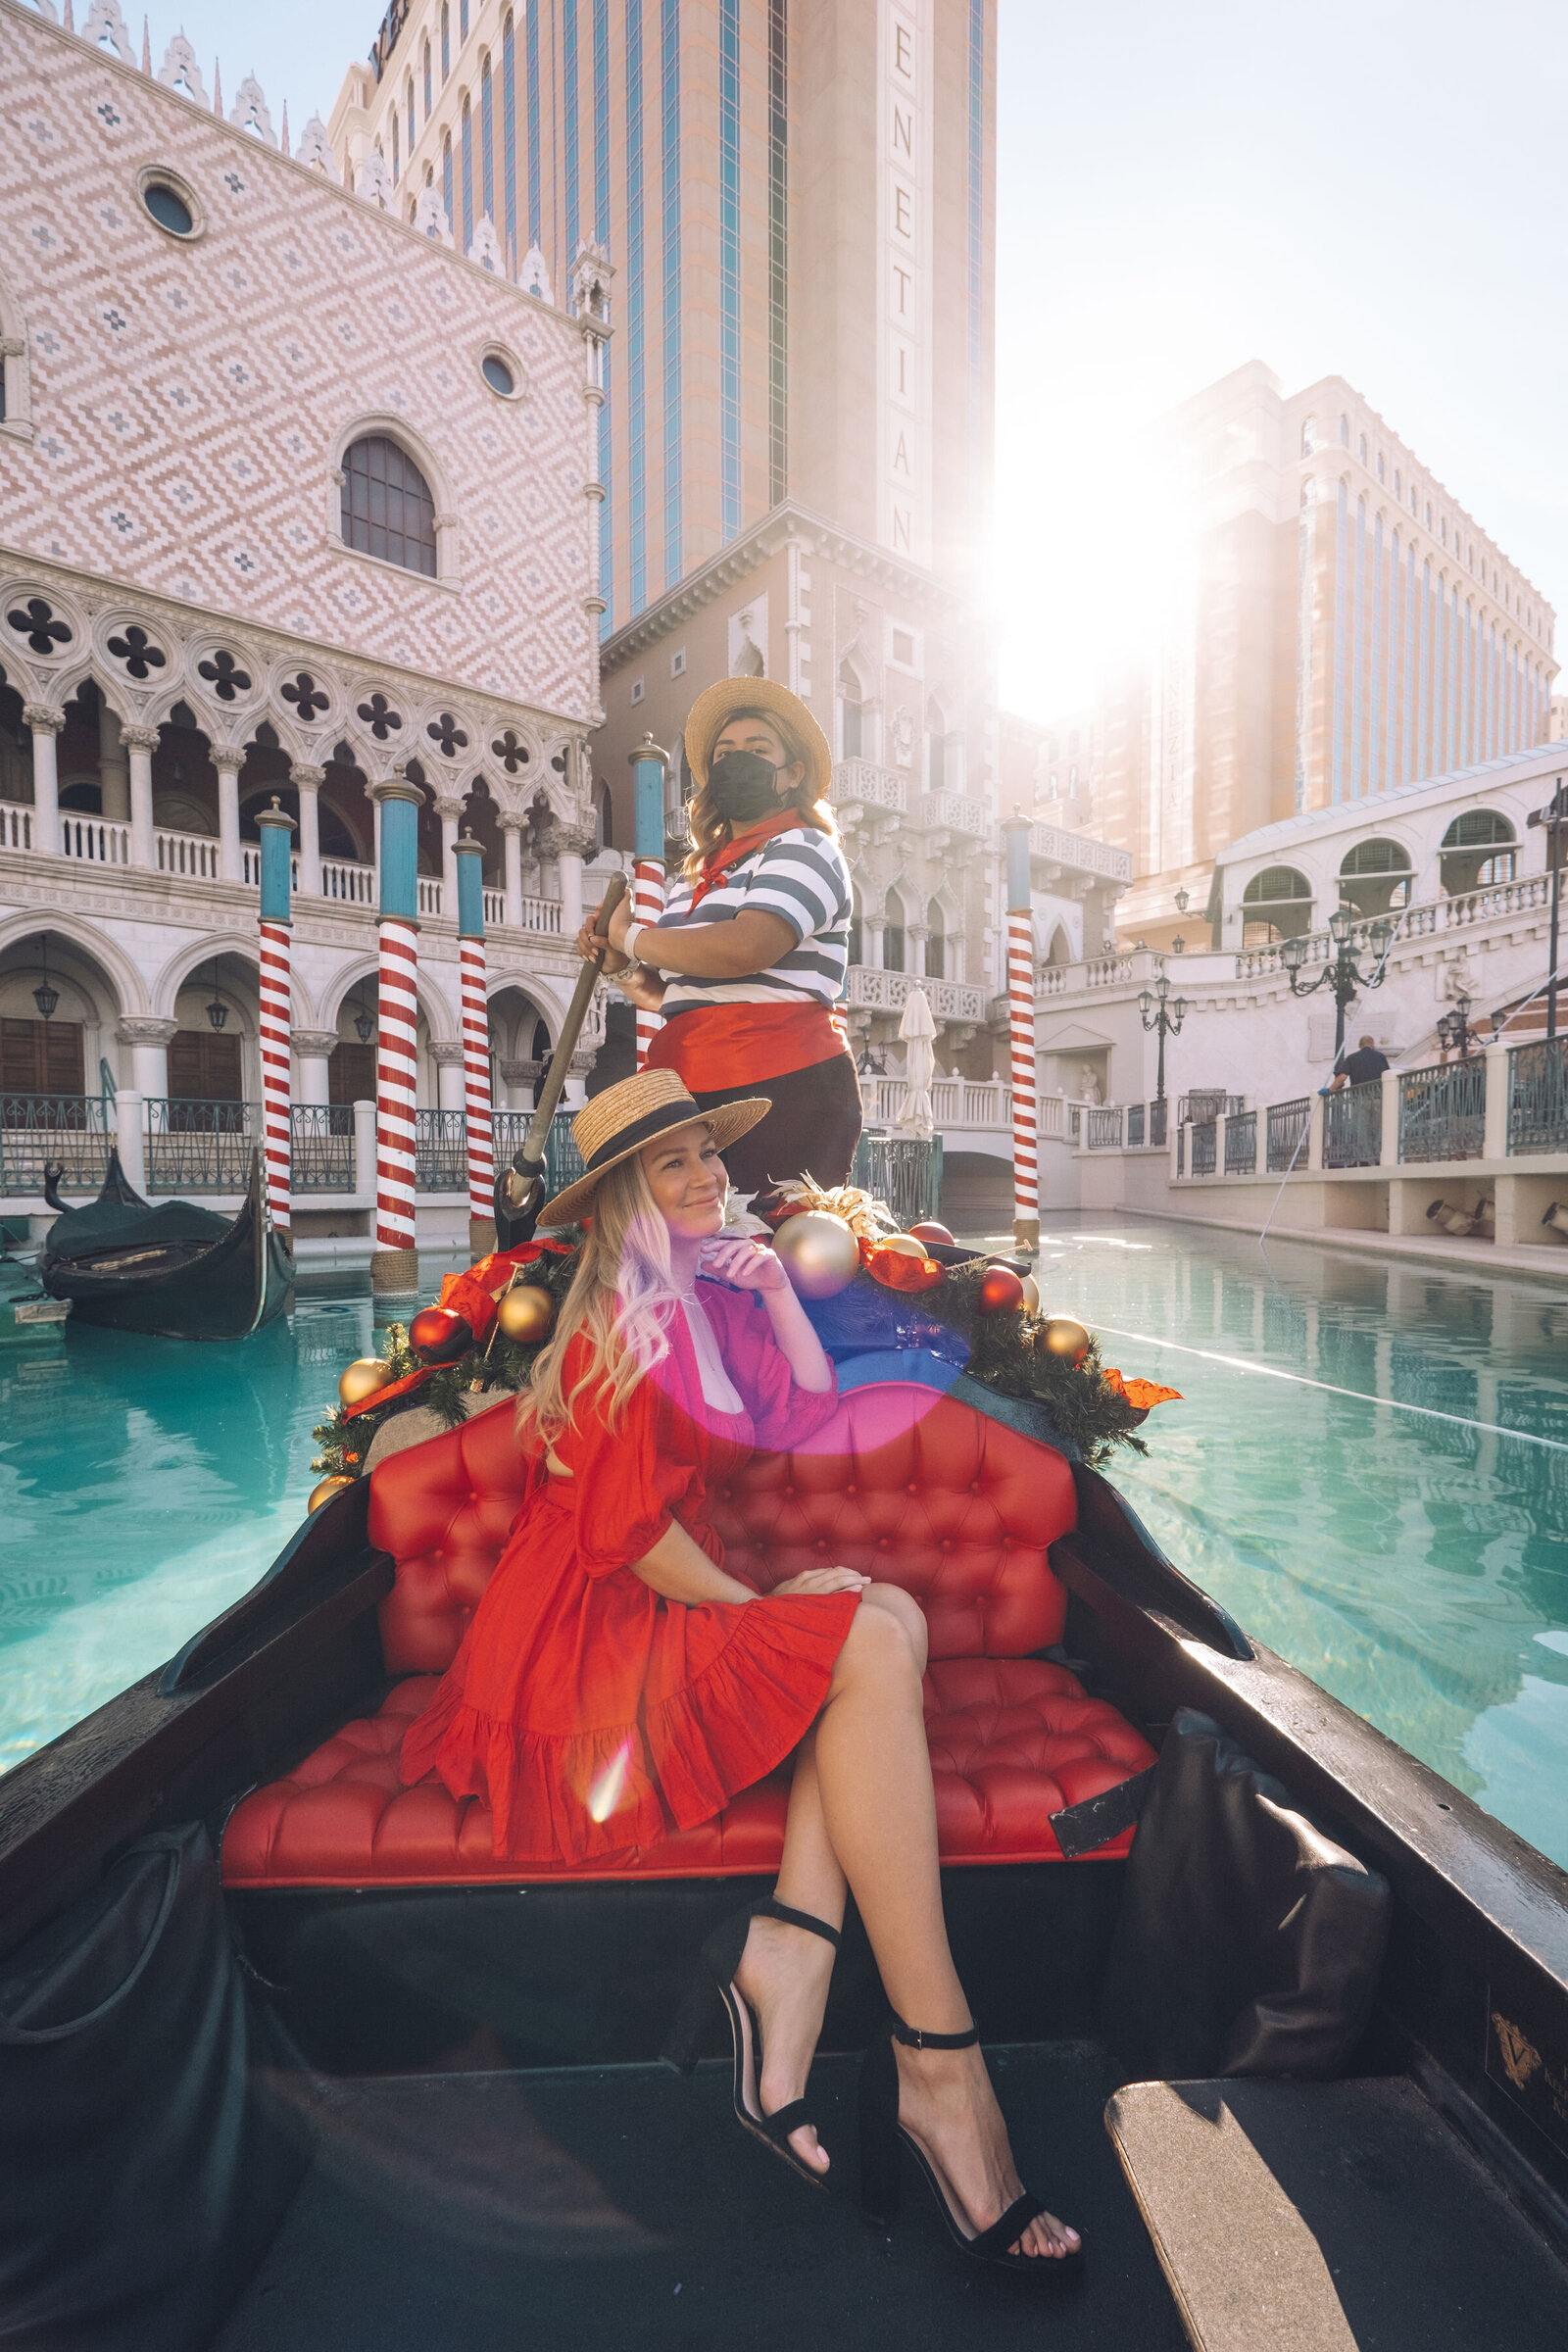 Branding photographer Chelsea Loren at the Venetian Hotel in Vegas with Kiersten Rich The Blonde Abroad travel blogger riding in a holiday gondola